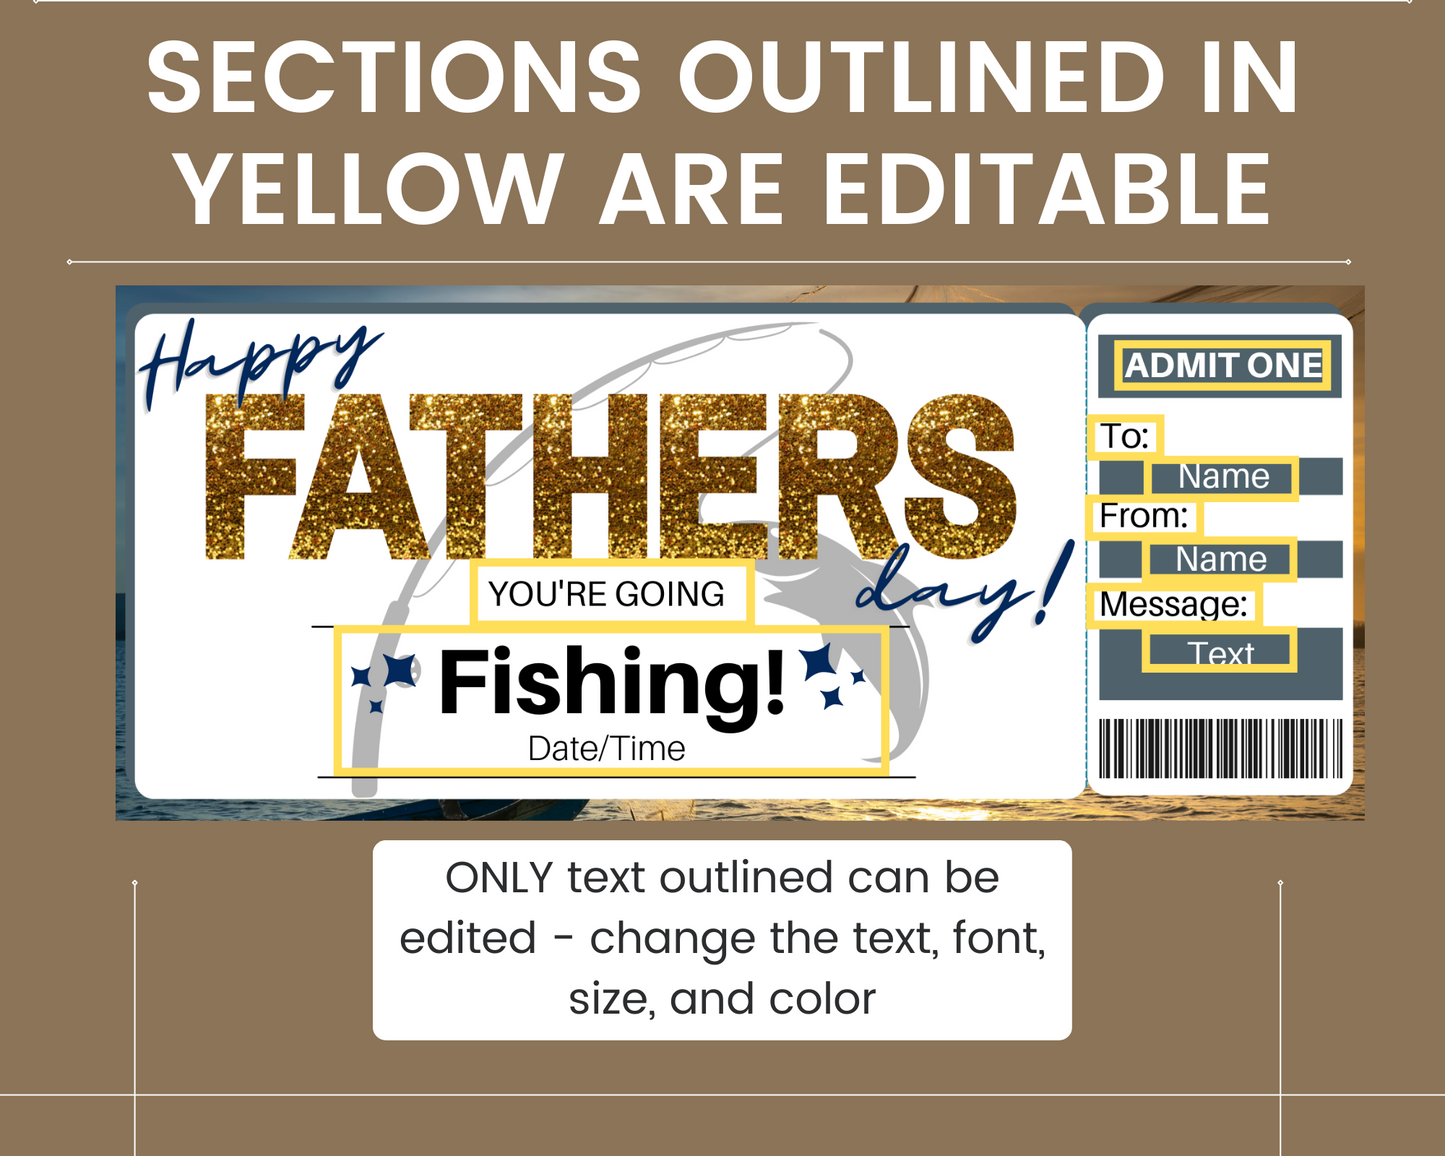 Father's Day Fishing Gift Ticket